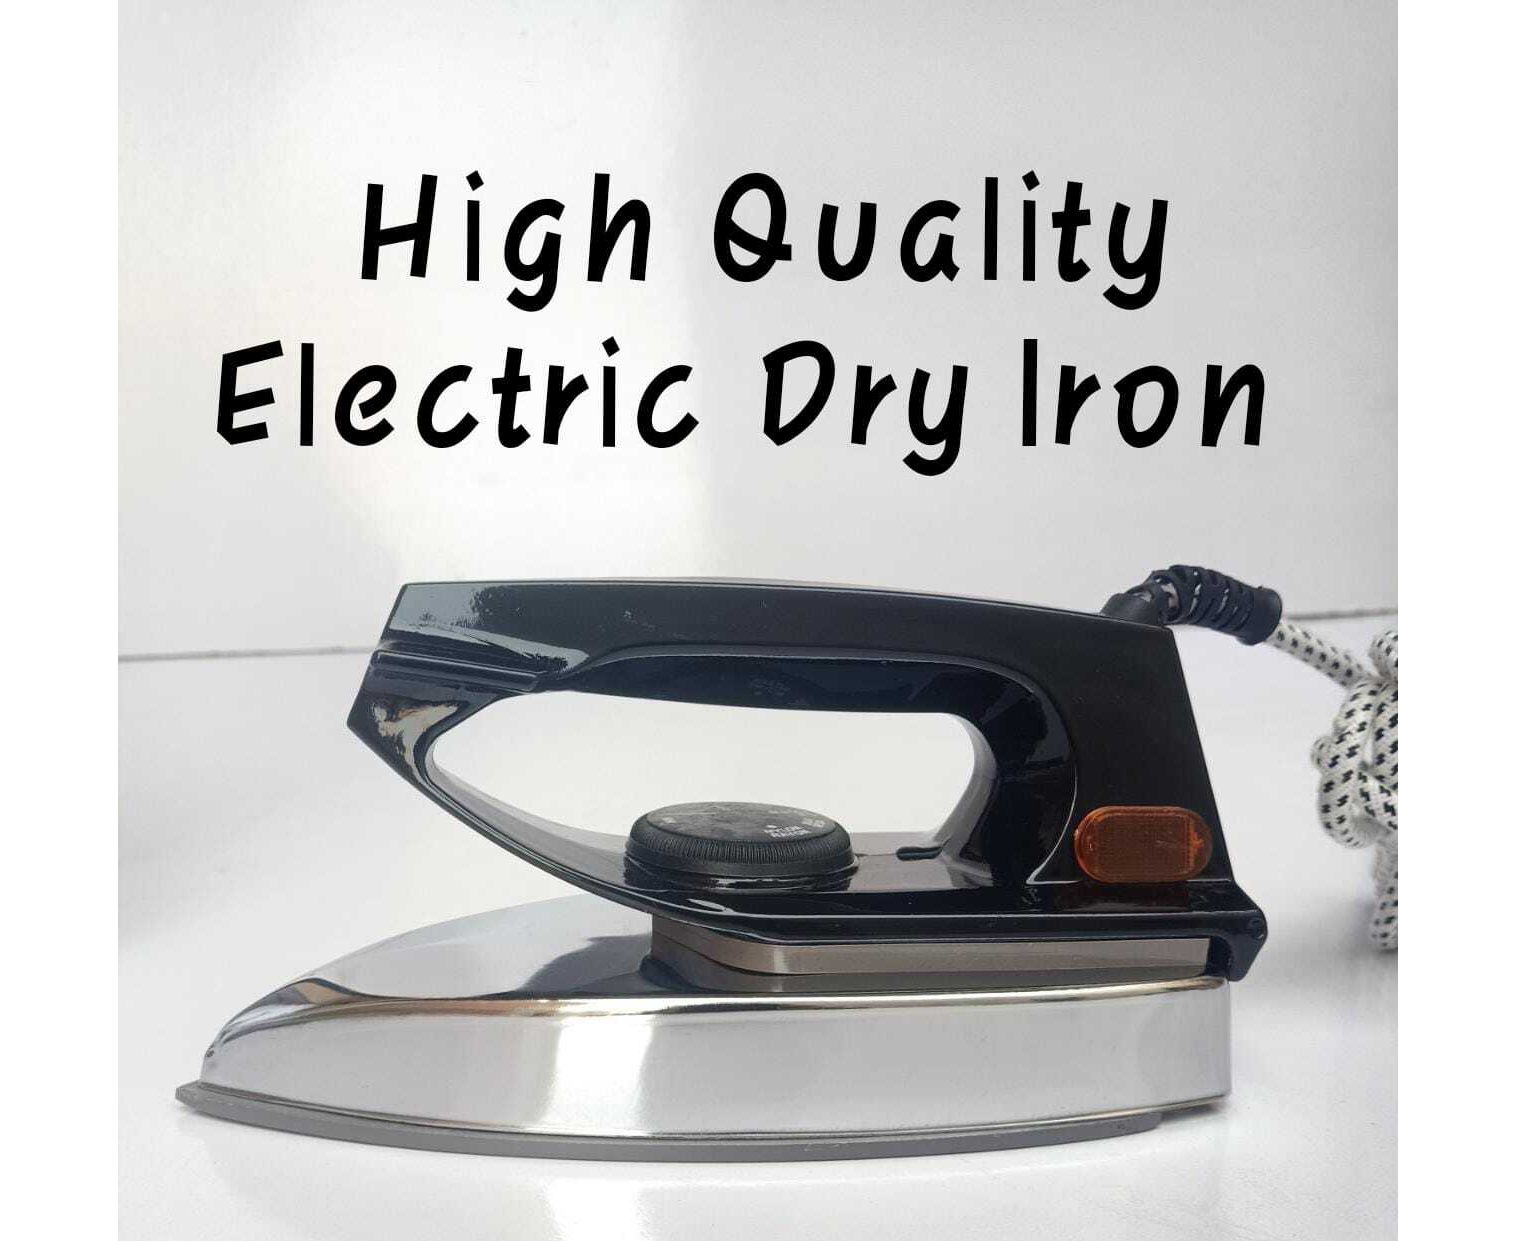 National Electric Iron HTC911